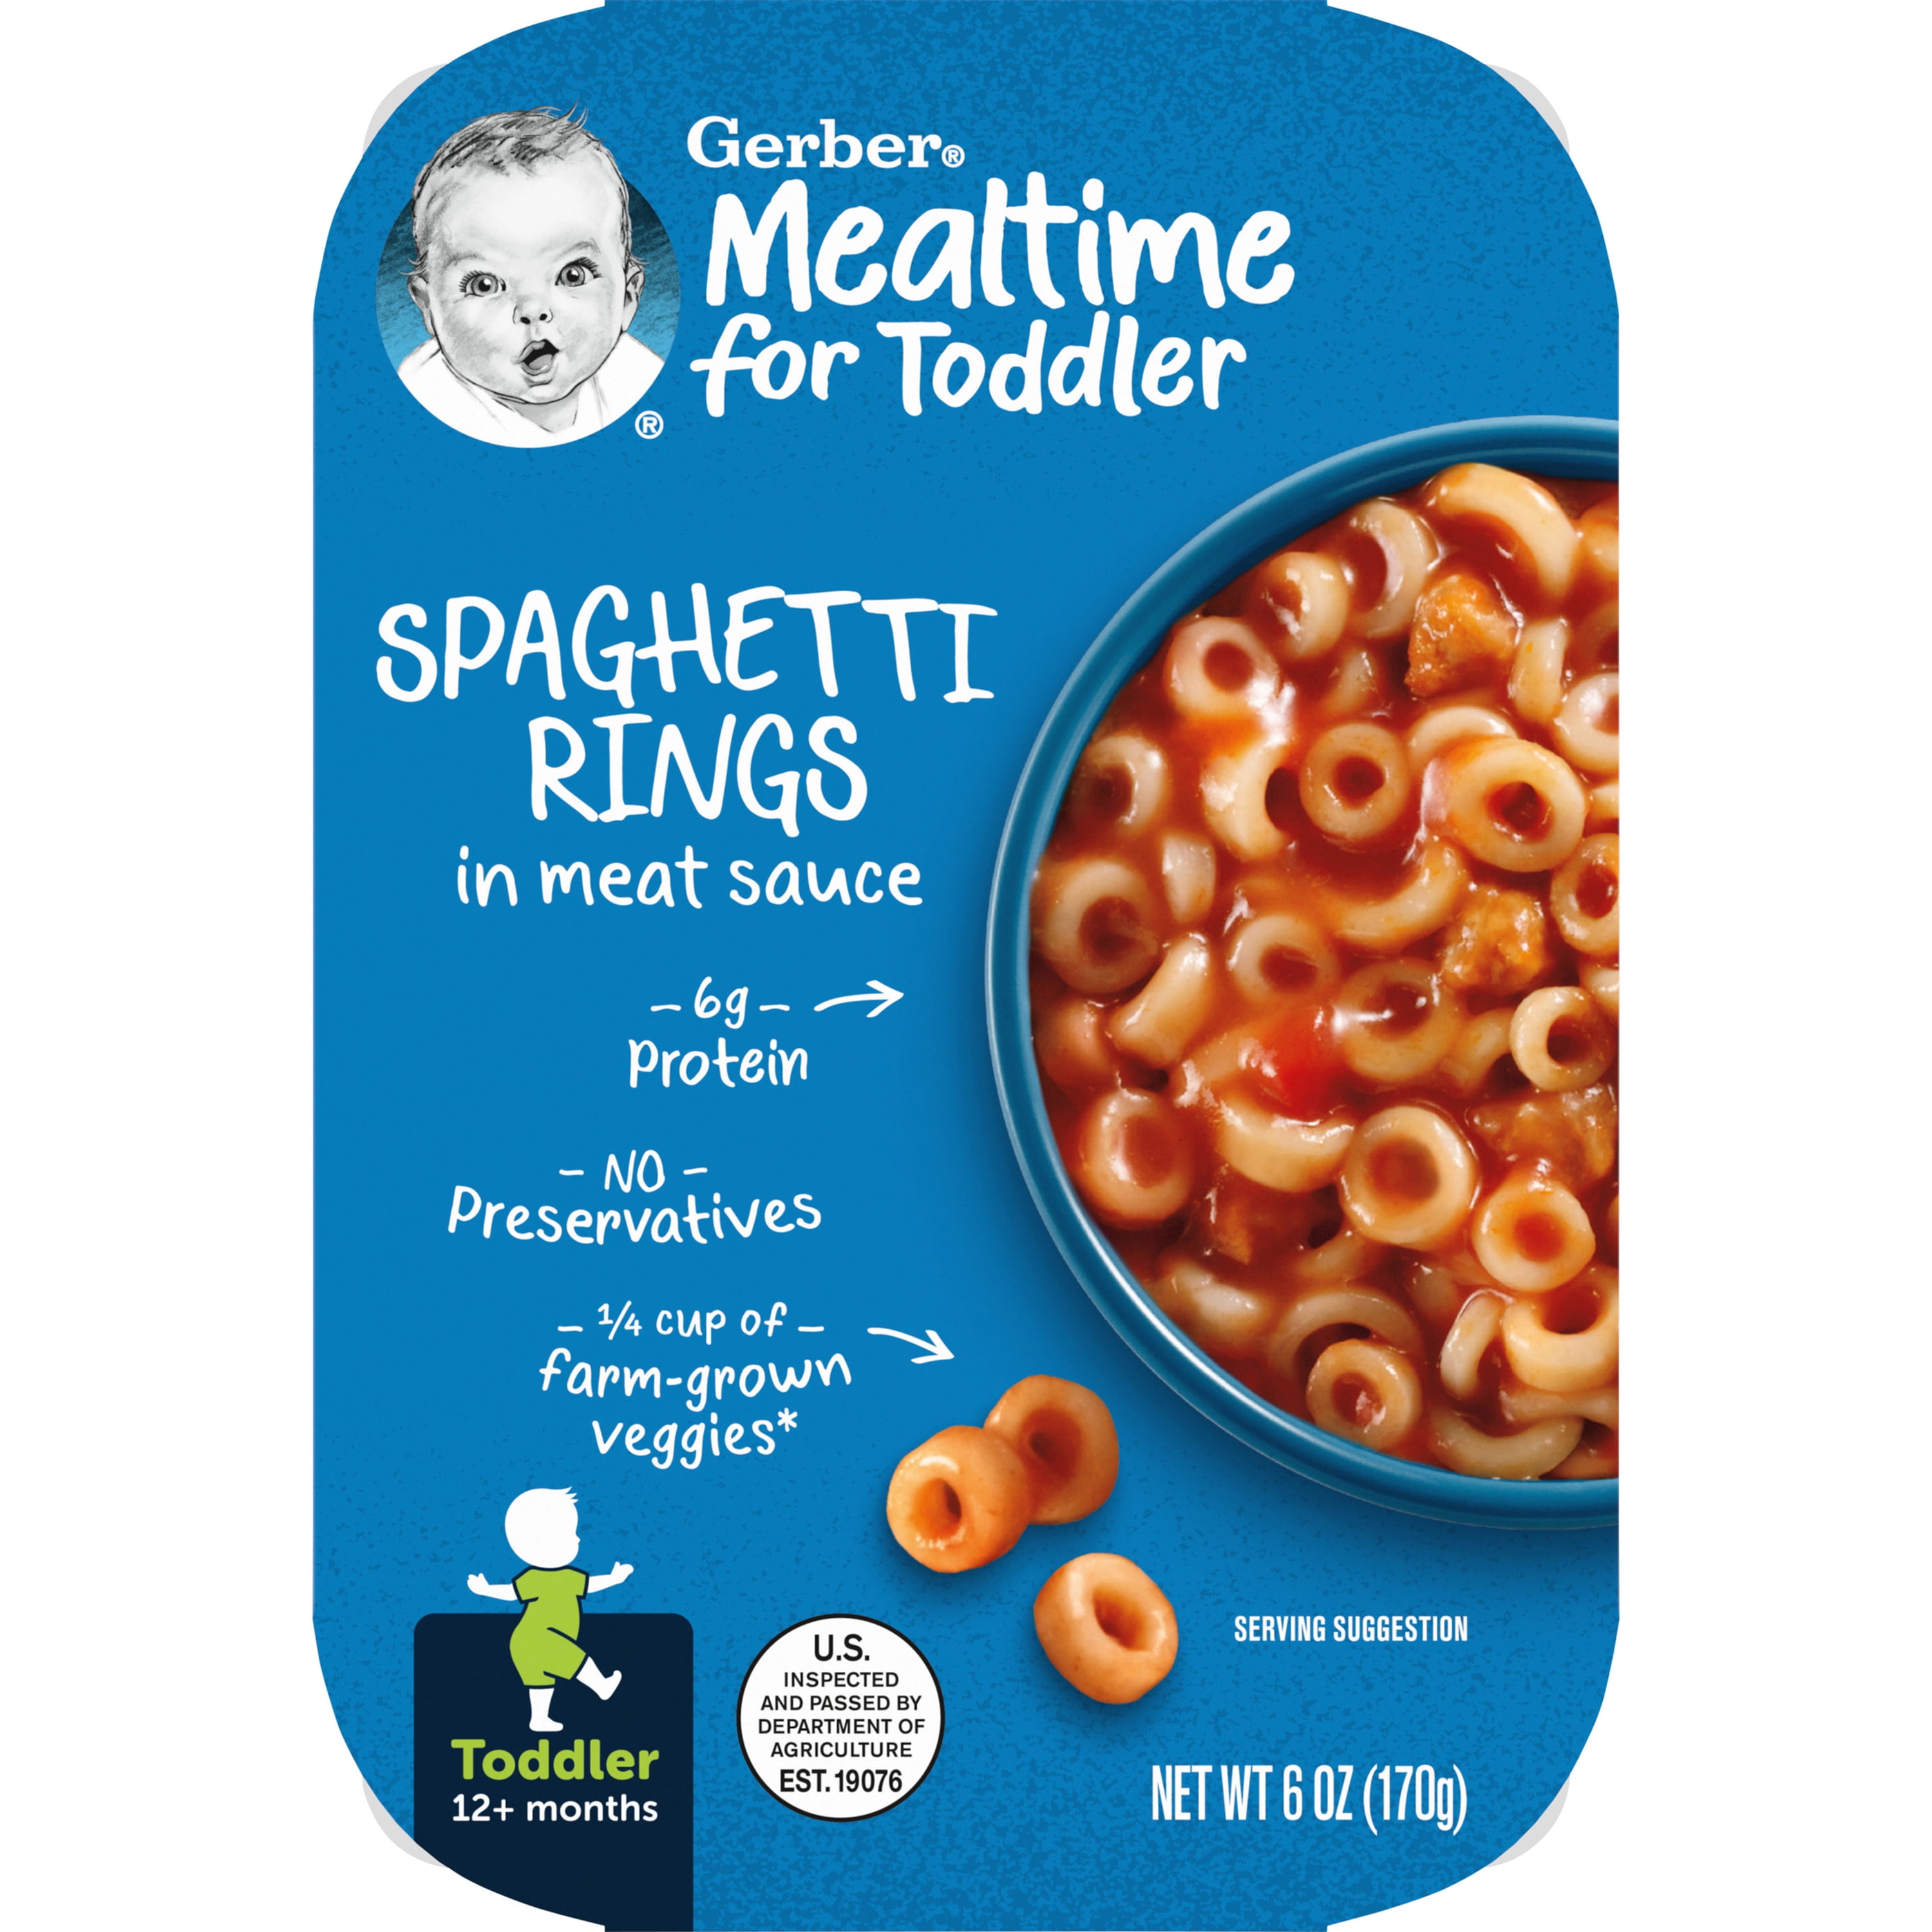 Gerber Mealtime for Toddler, Spaghetti Rings in Meat Sauce Toddler Food, 6 oz Tray